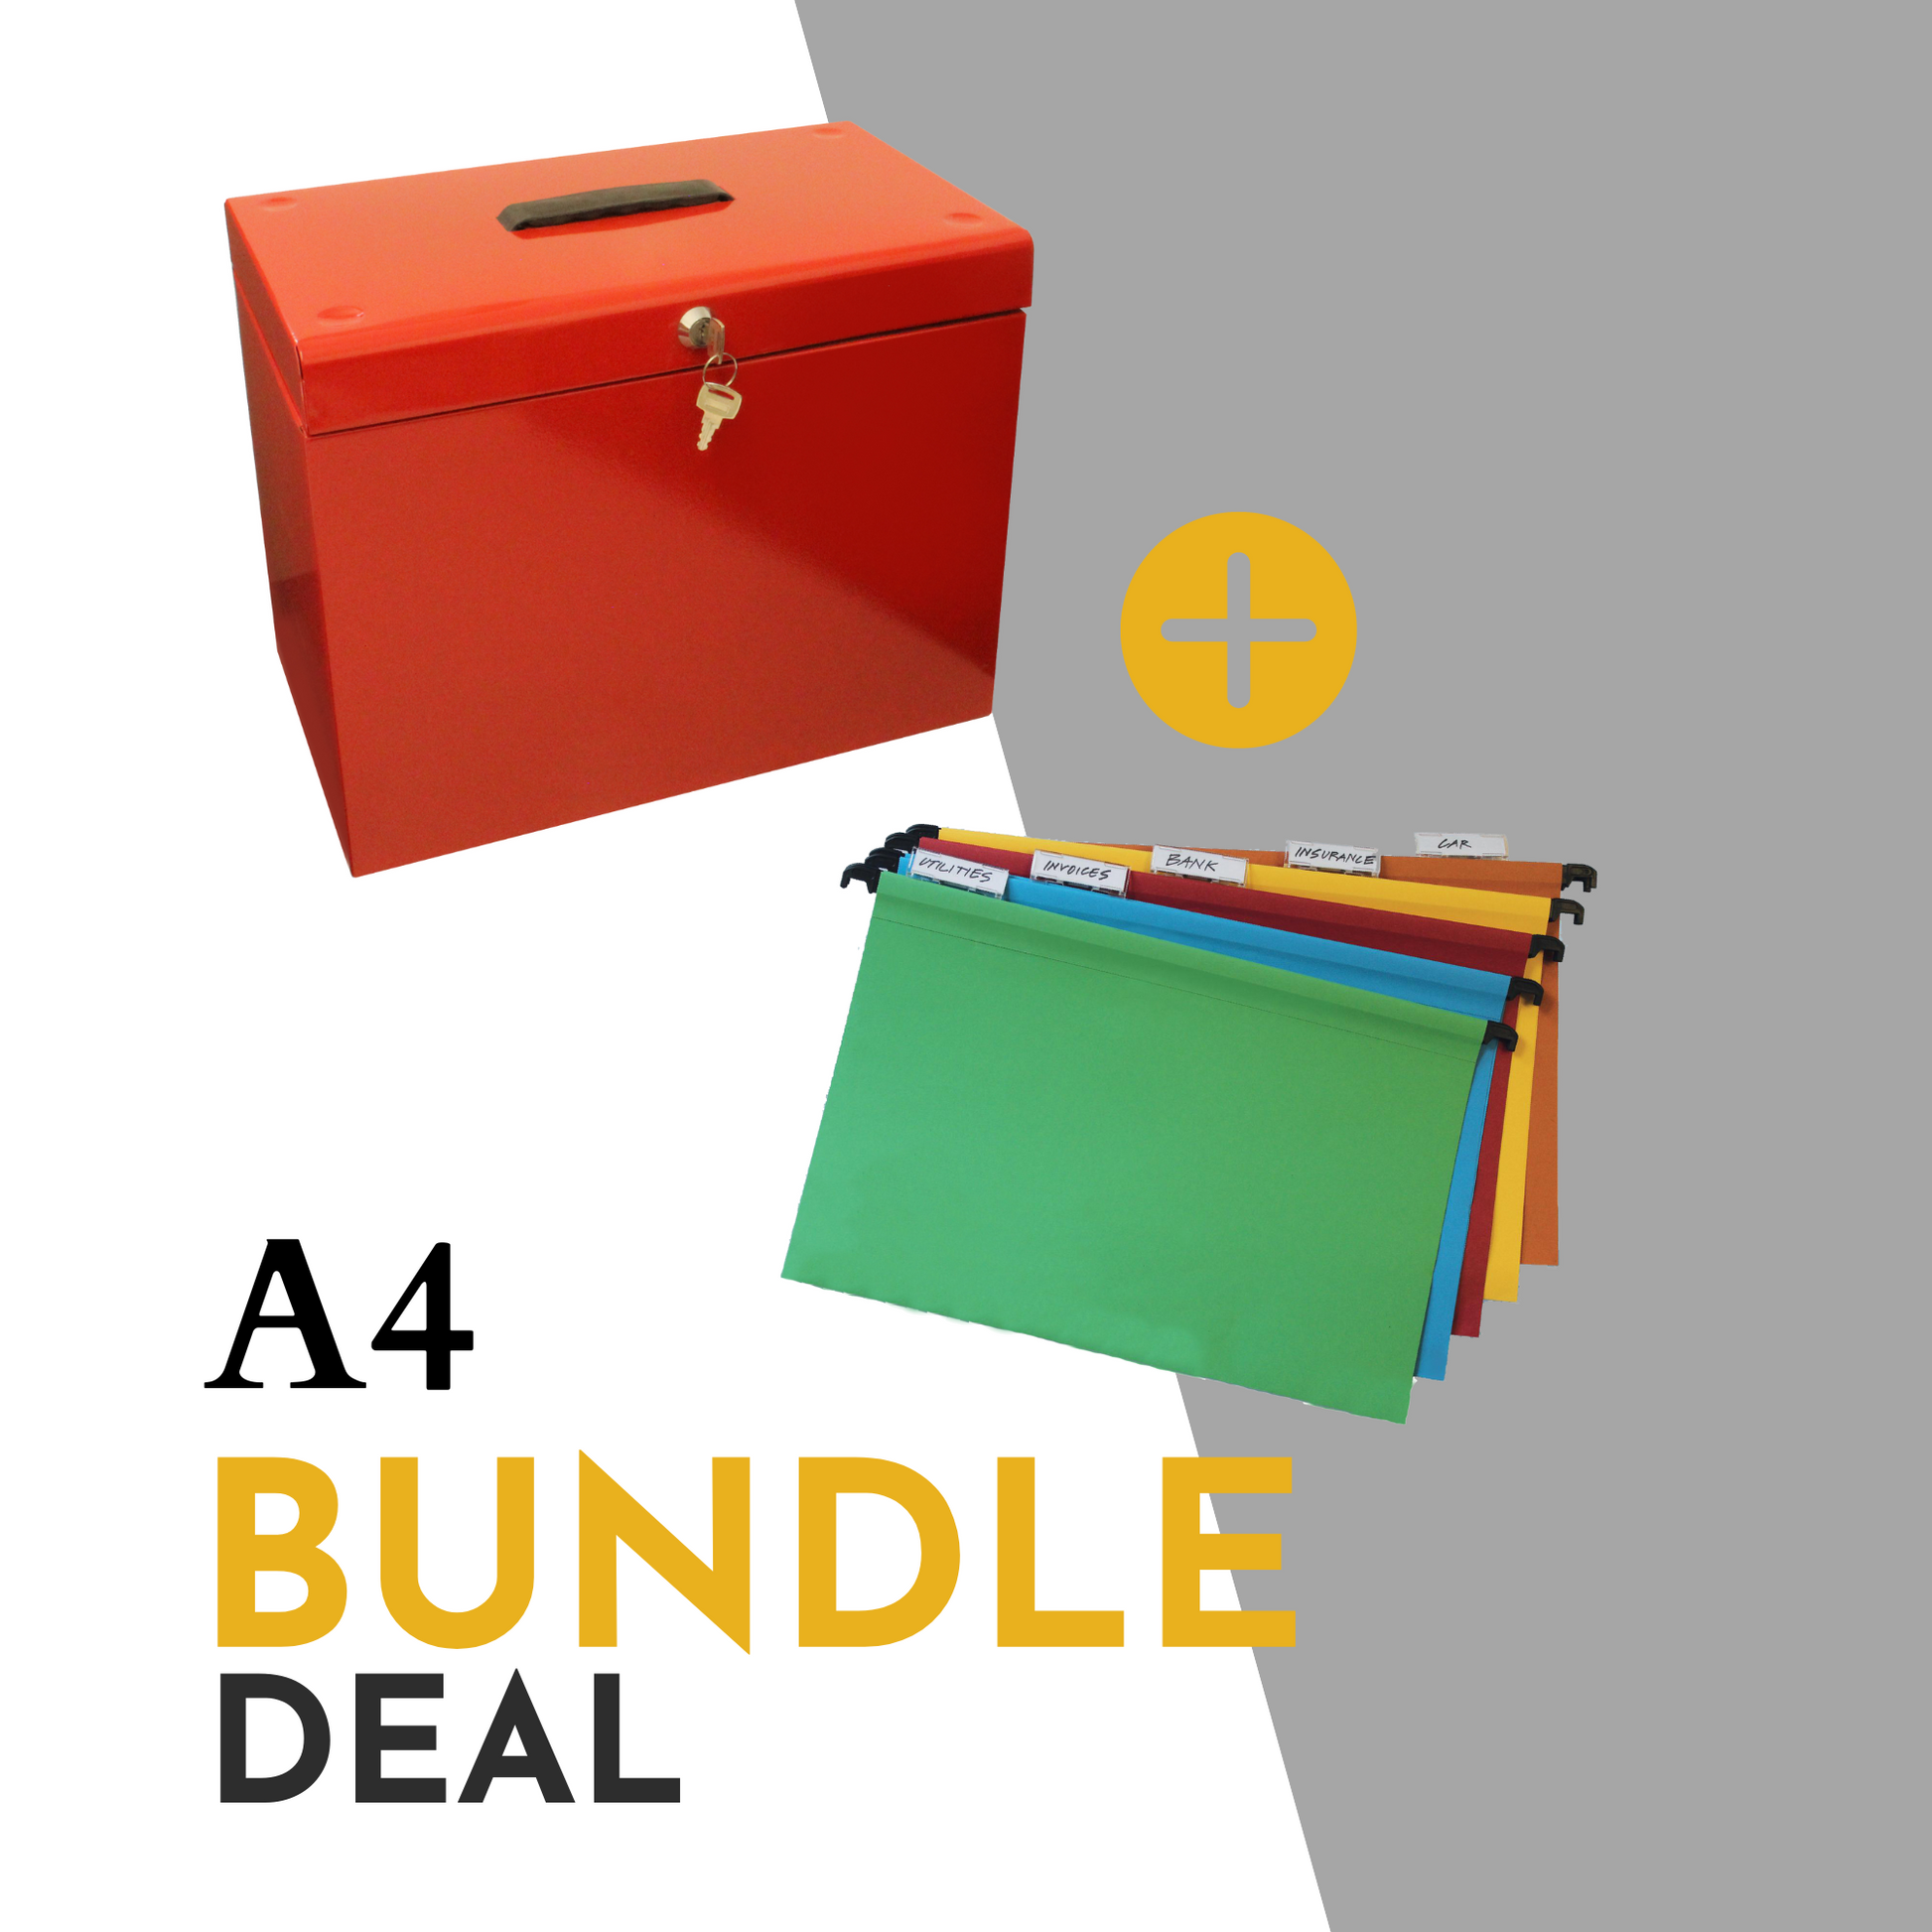 Promotional image for an A4 file storage bundle deal, including a red file box with a handle and key lock, plus an additional set of 10 assorted color A4 suspension files with index tabs, showcasing an organized filing solution.